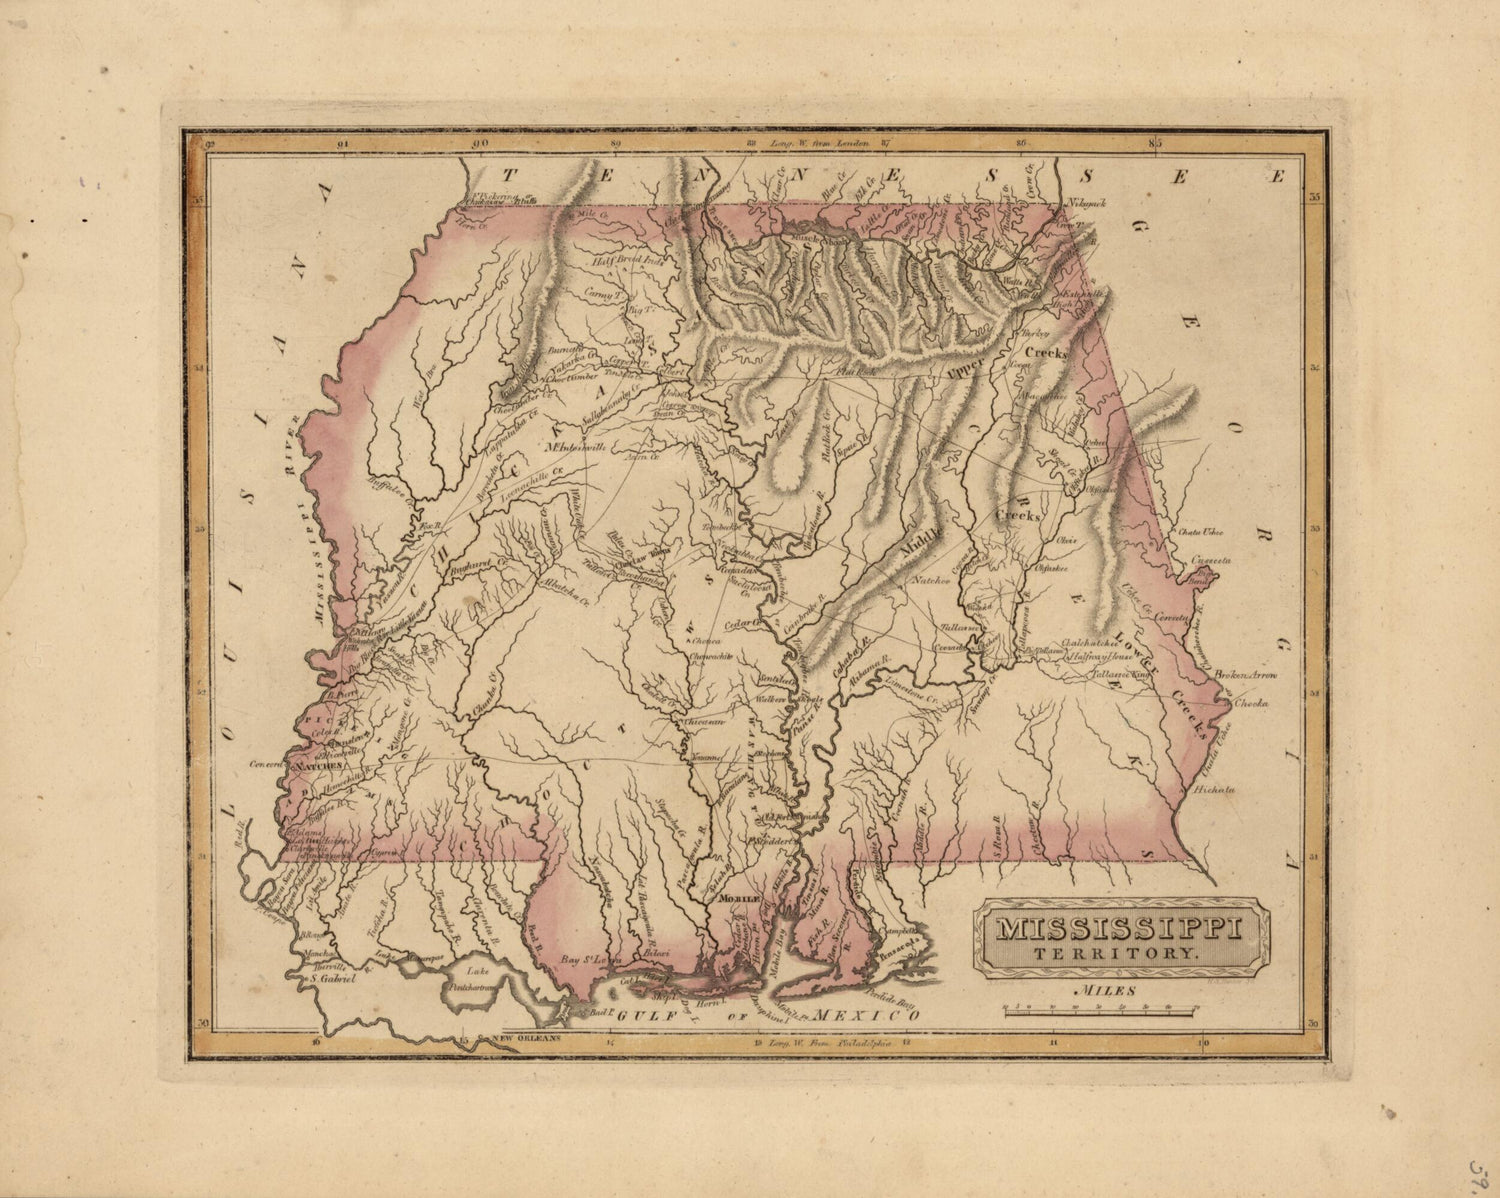 This old map of Mississippi Territory from a New and Elegant General Atlas, Containing Maps of Each of the United States  from 1817 was created by Henry Schenck Tanner in 1817